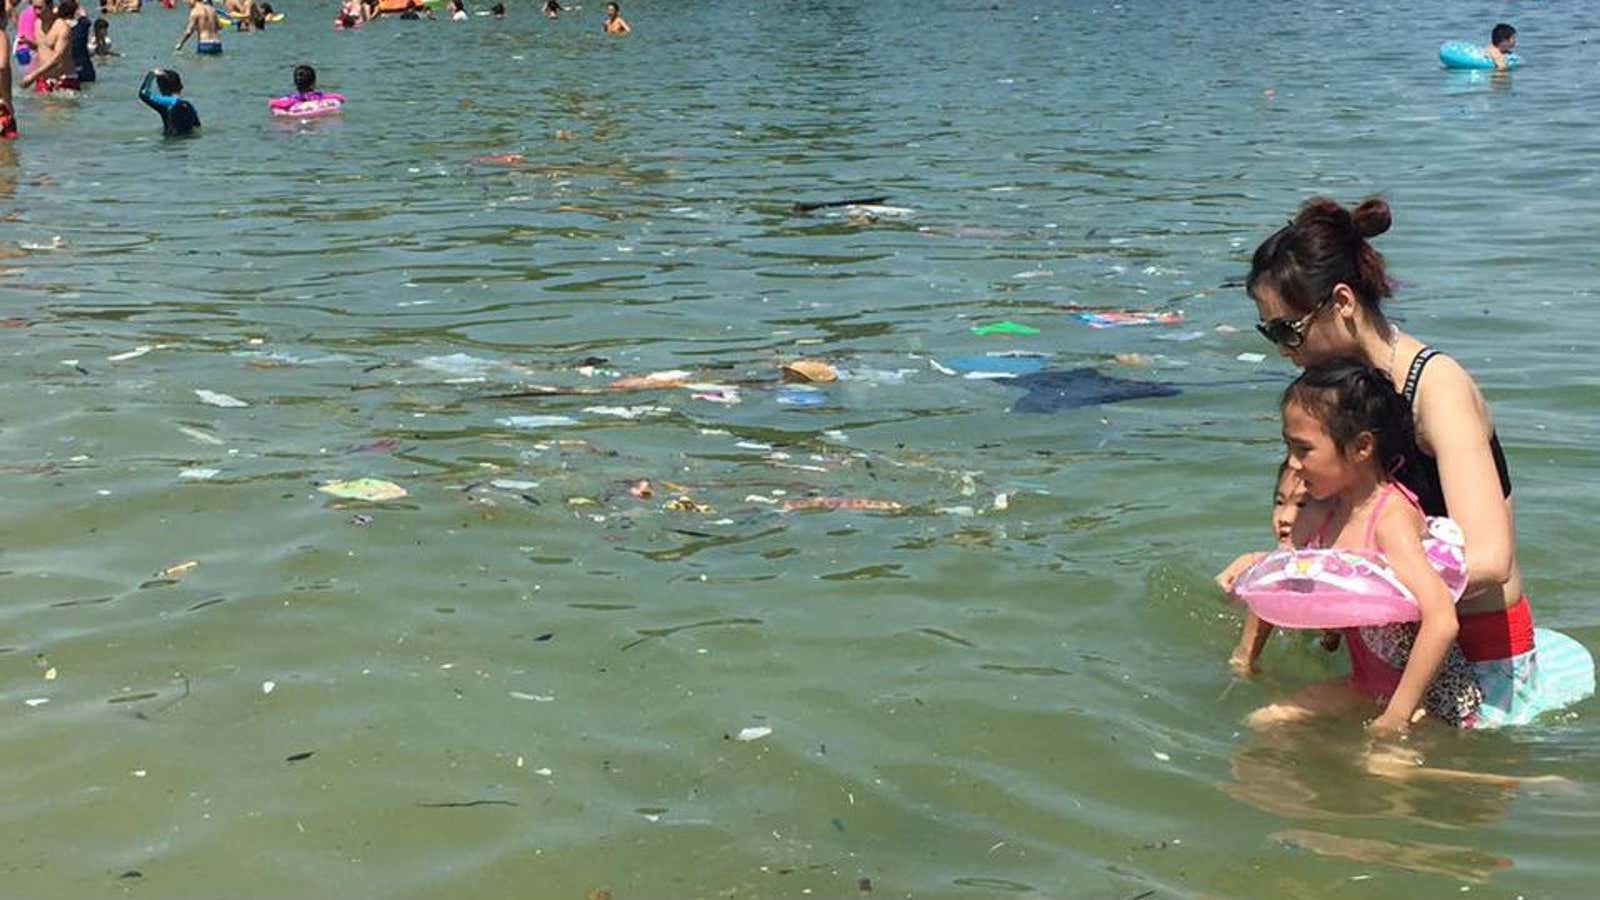 Trash floats in the waters of one of Hong Kong’s beaches.